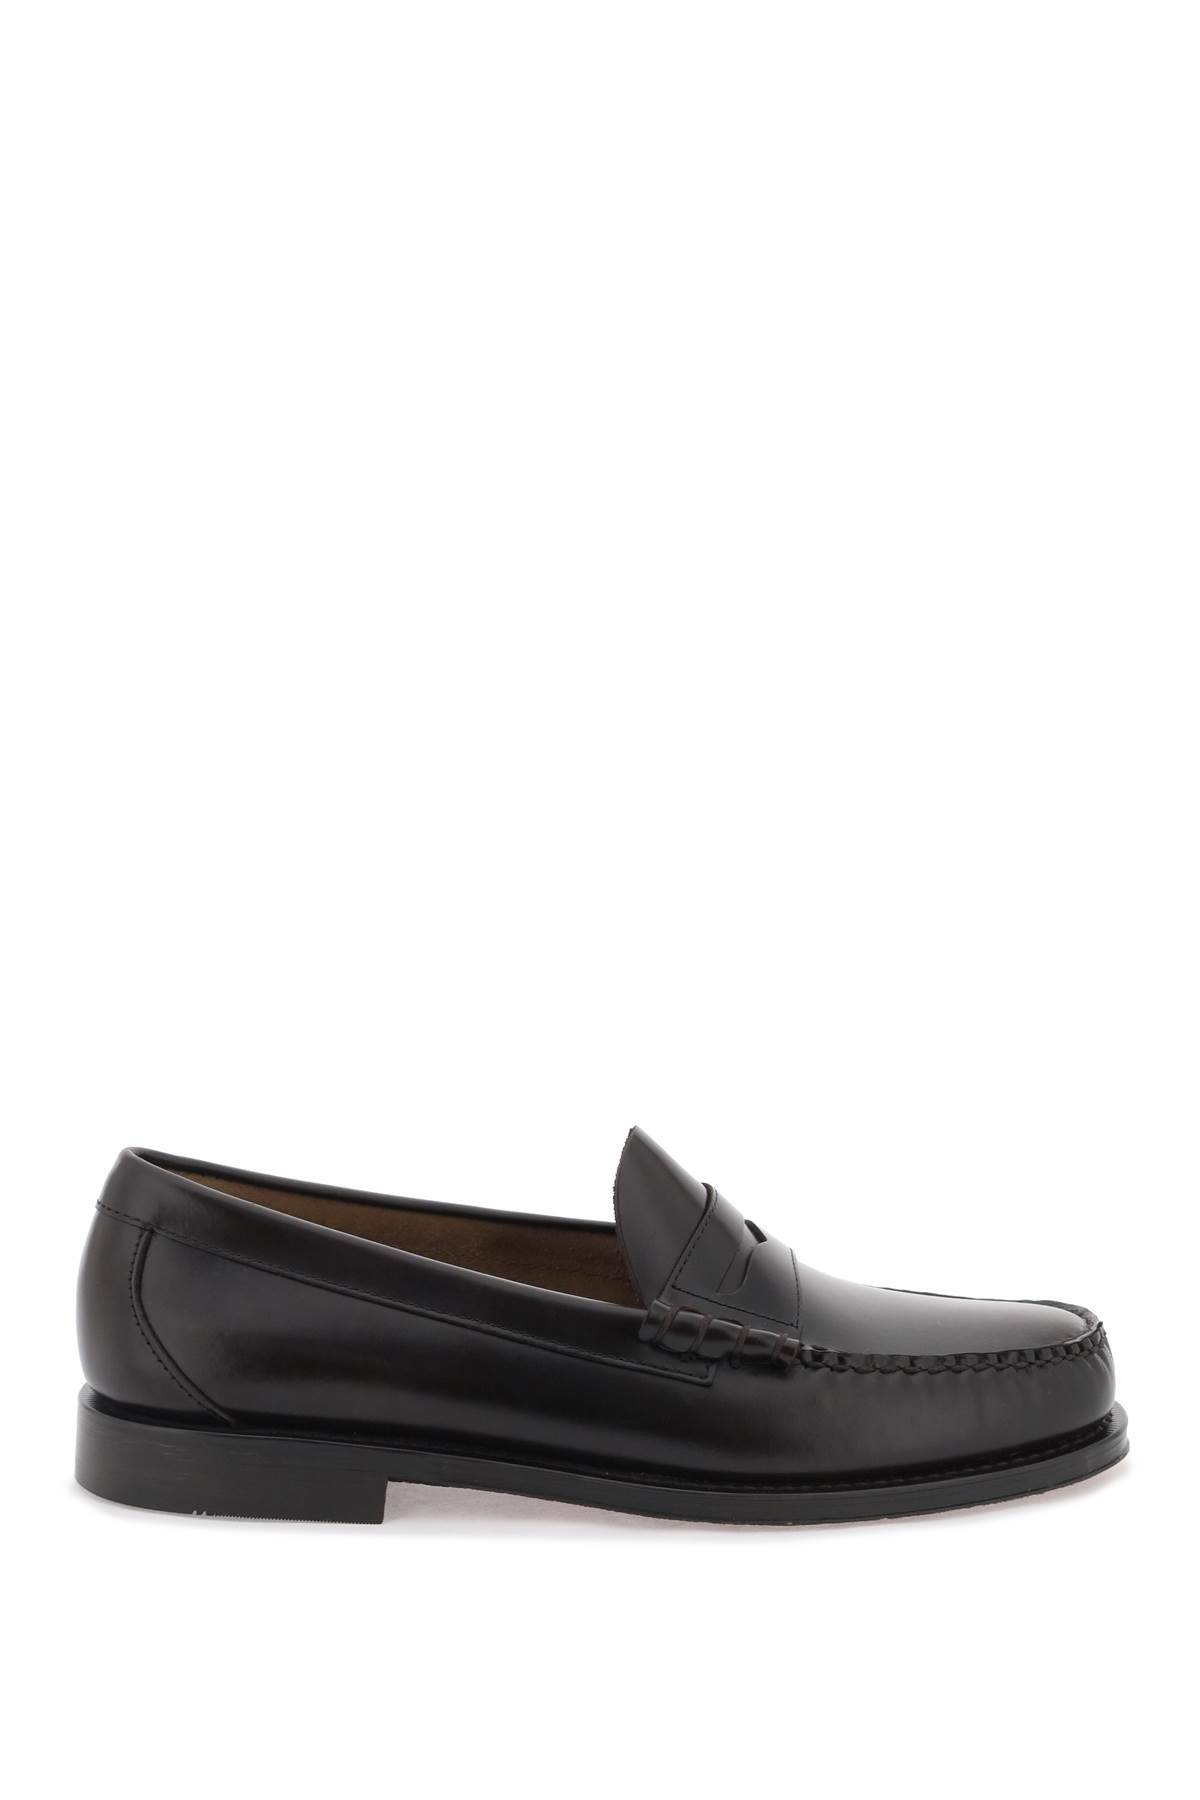 G.H. BASS G. H. BASS weejuns larson penny loafers